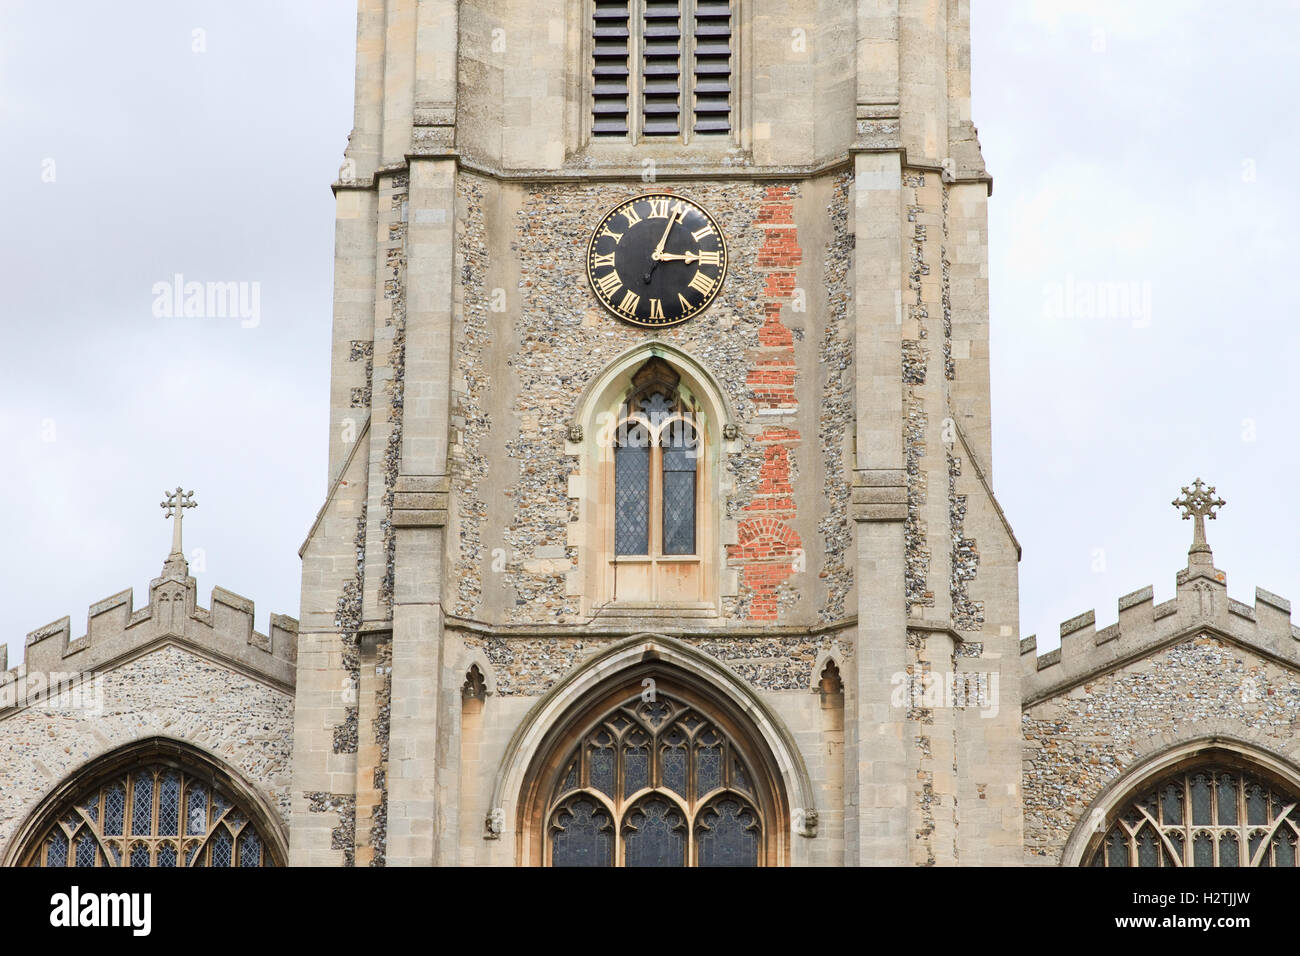 Upper section of church and middle section of spire of the Parish Church of St. Mary the Virgin in Saffron Walden, England. Stock Photo